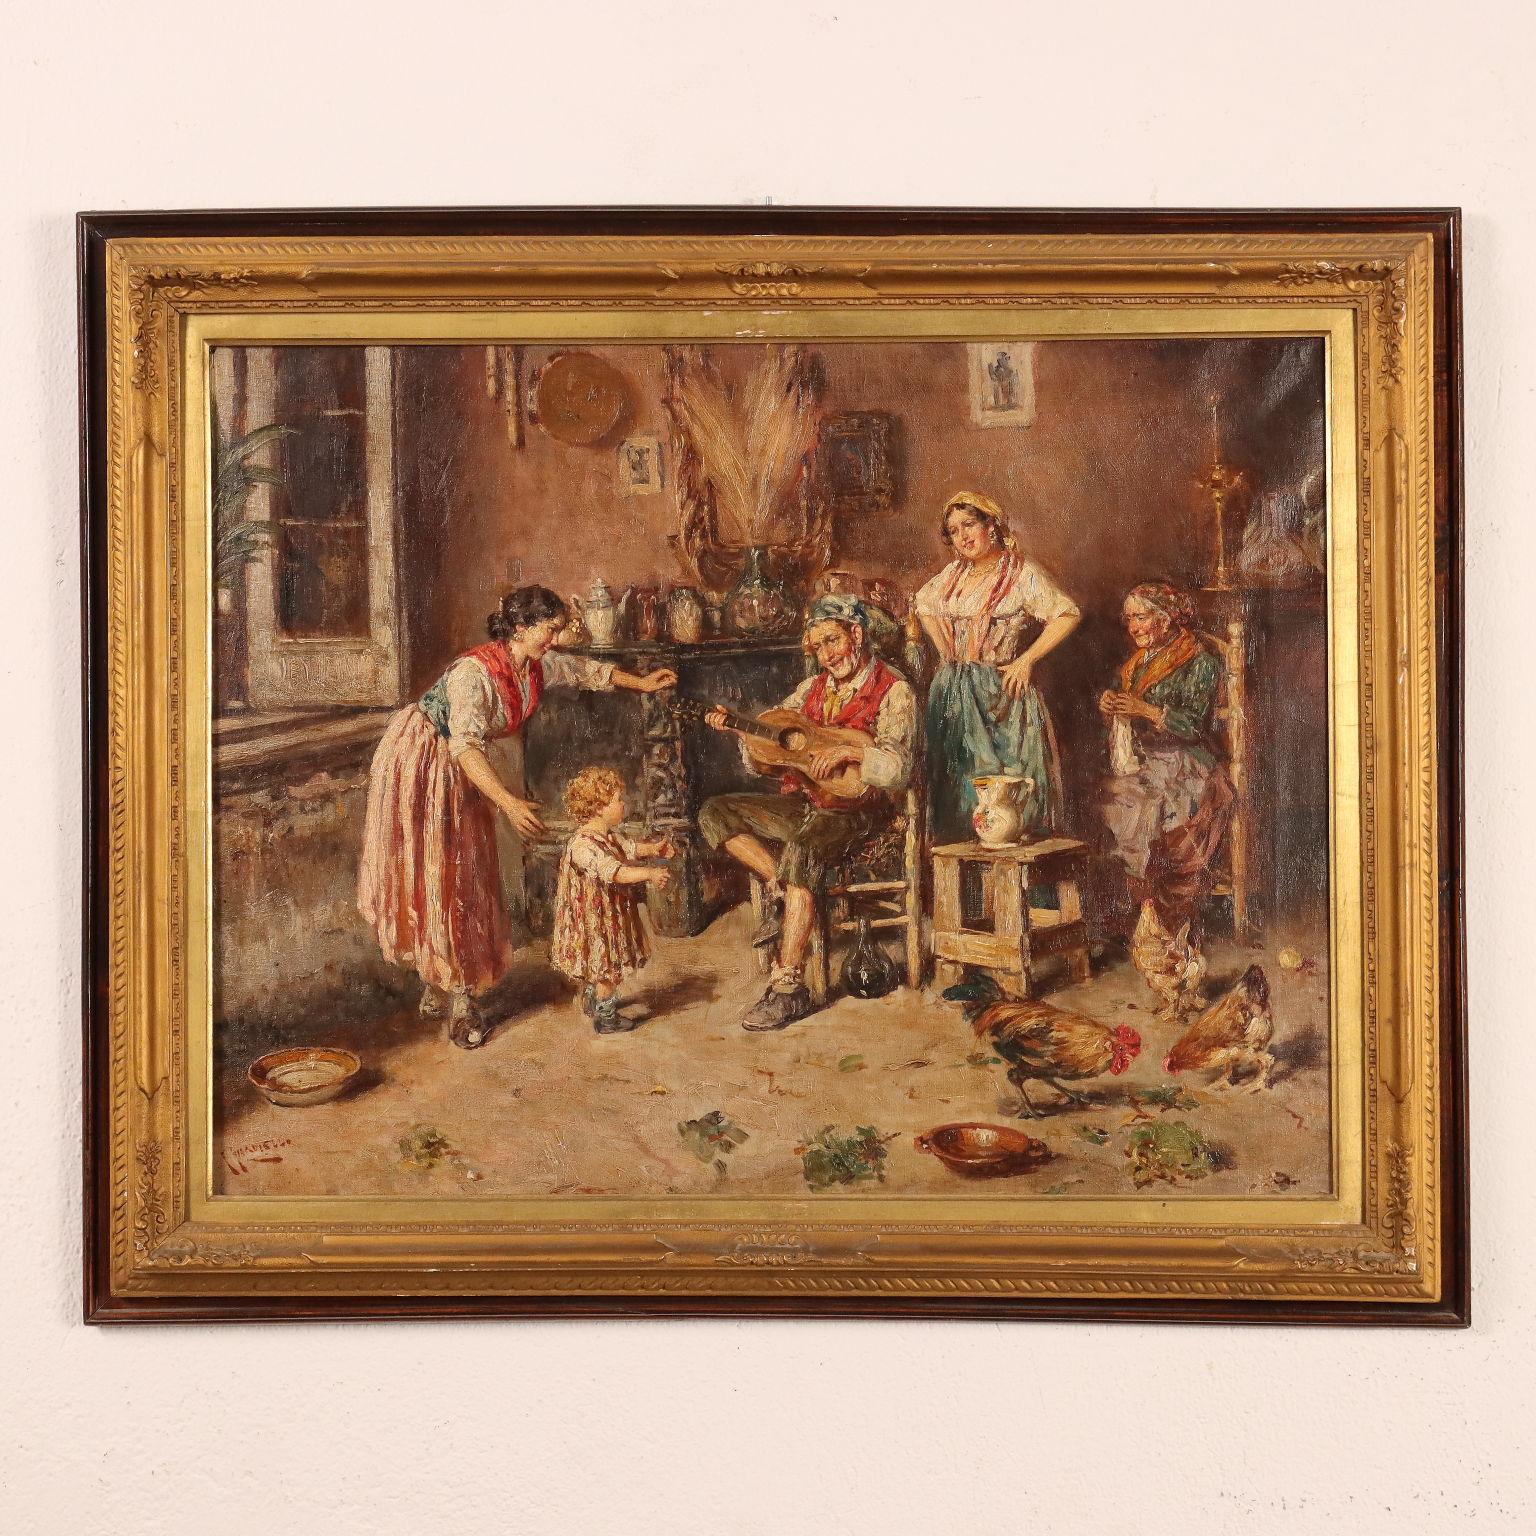 Oil on Canvas. Signed in lower left hand corner.
Inside a rural kitchen, a farming family indulges in a festive moment: the father plays the mandolin, listened to by the little girl who hints at wanting to dance, assisted by her mother, and the